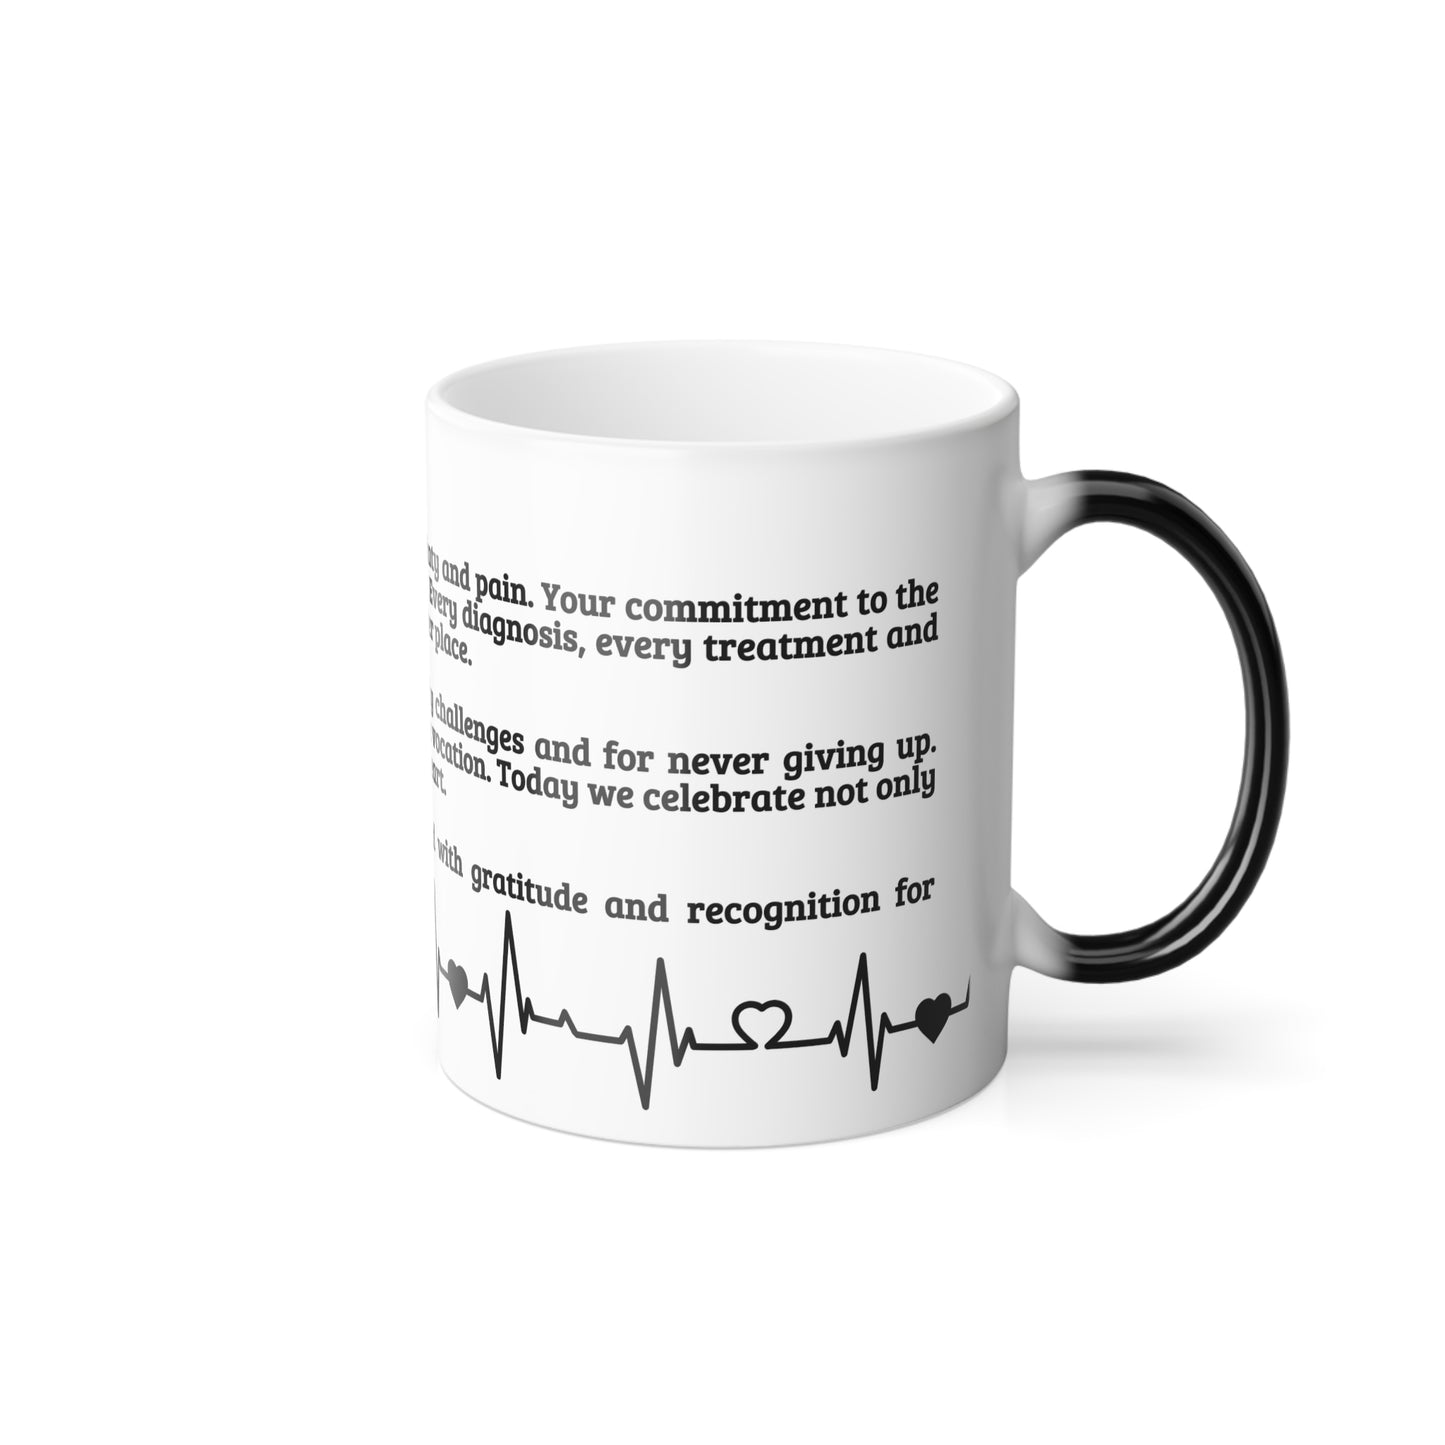 Color morphing ceramic custom Mug 11oz  (Doctor's Day personalized message)